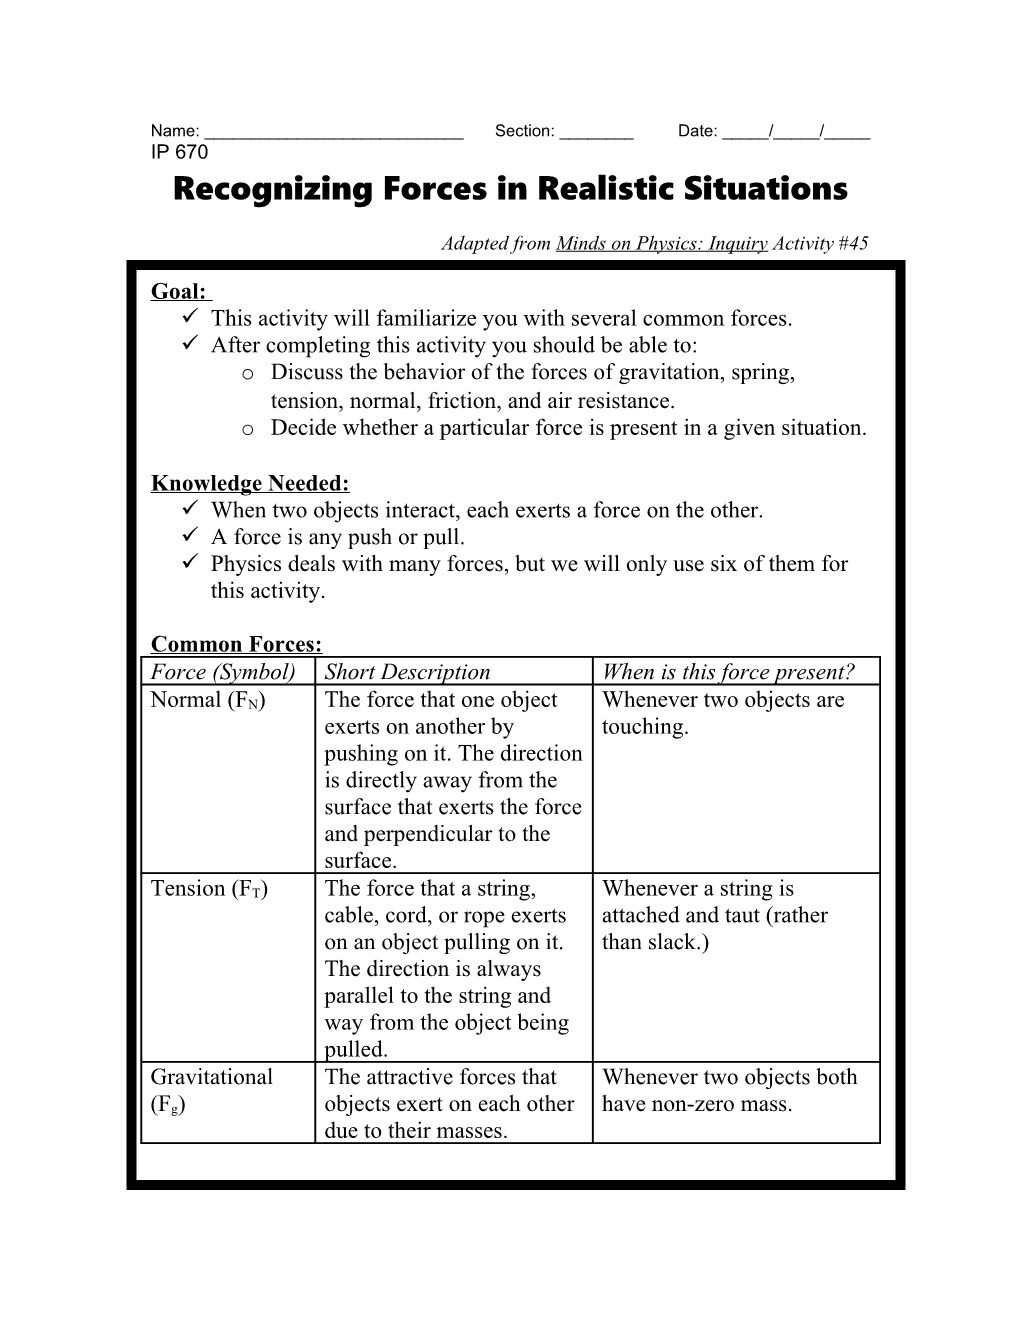 Recognizing Forces in Realistic Situations